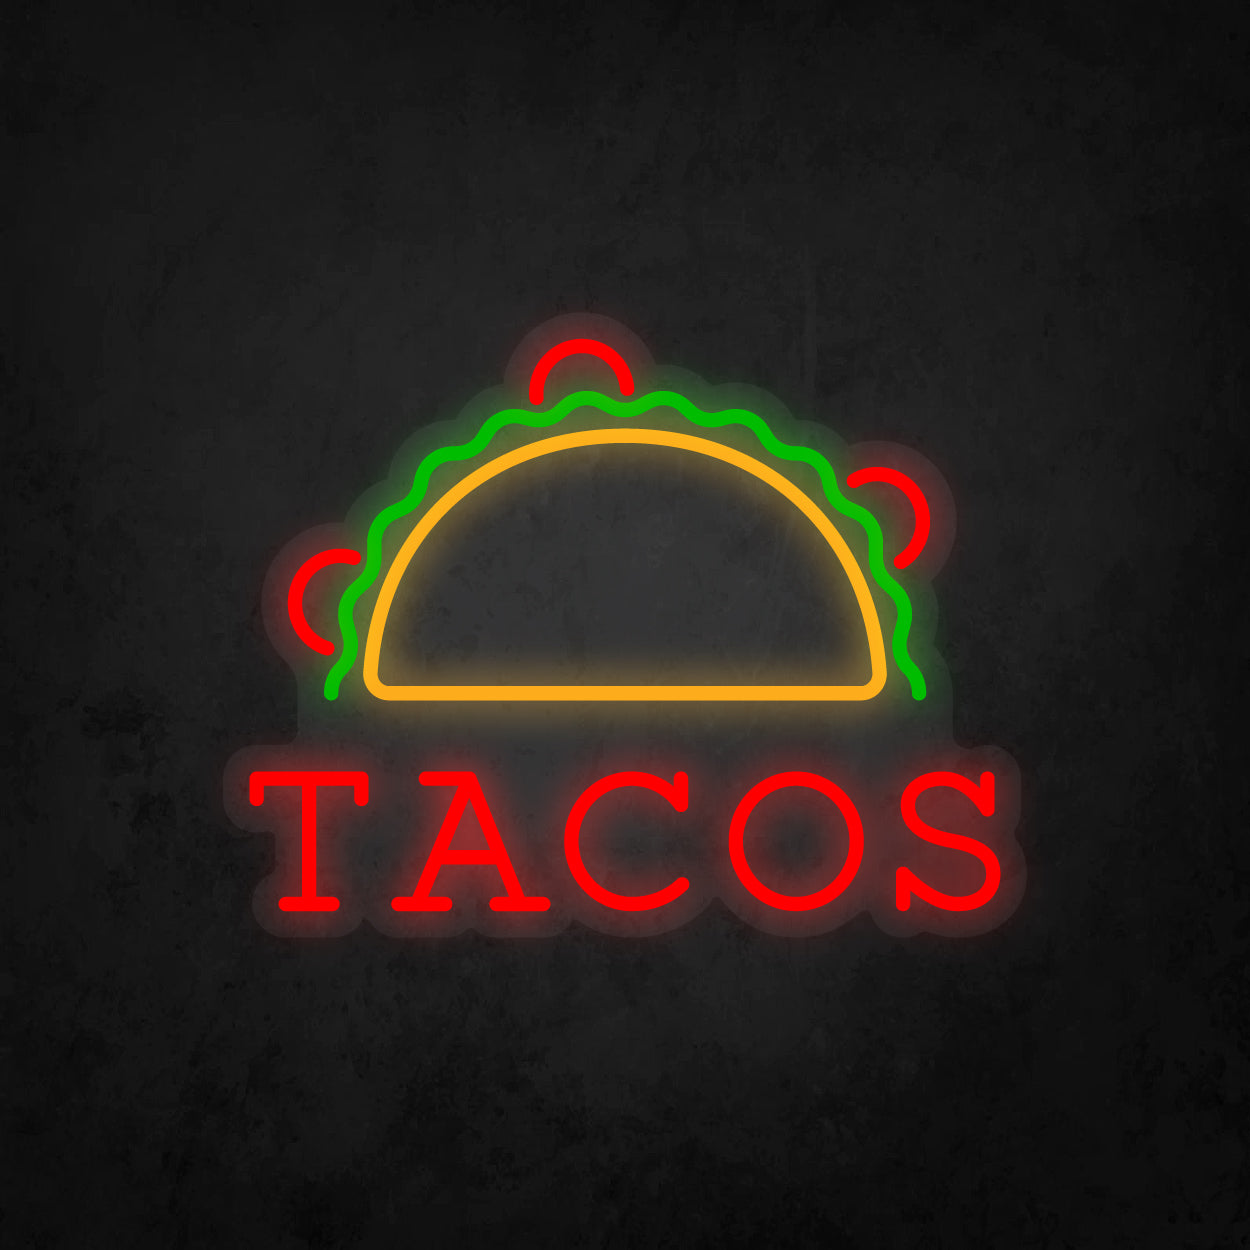 LED Neon Sign - TACOS